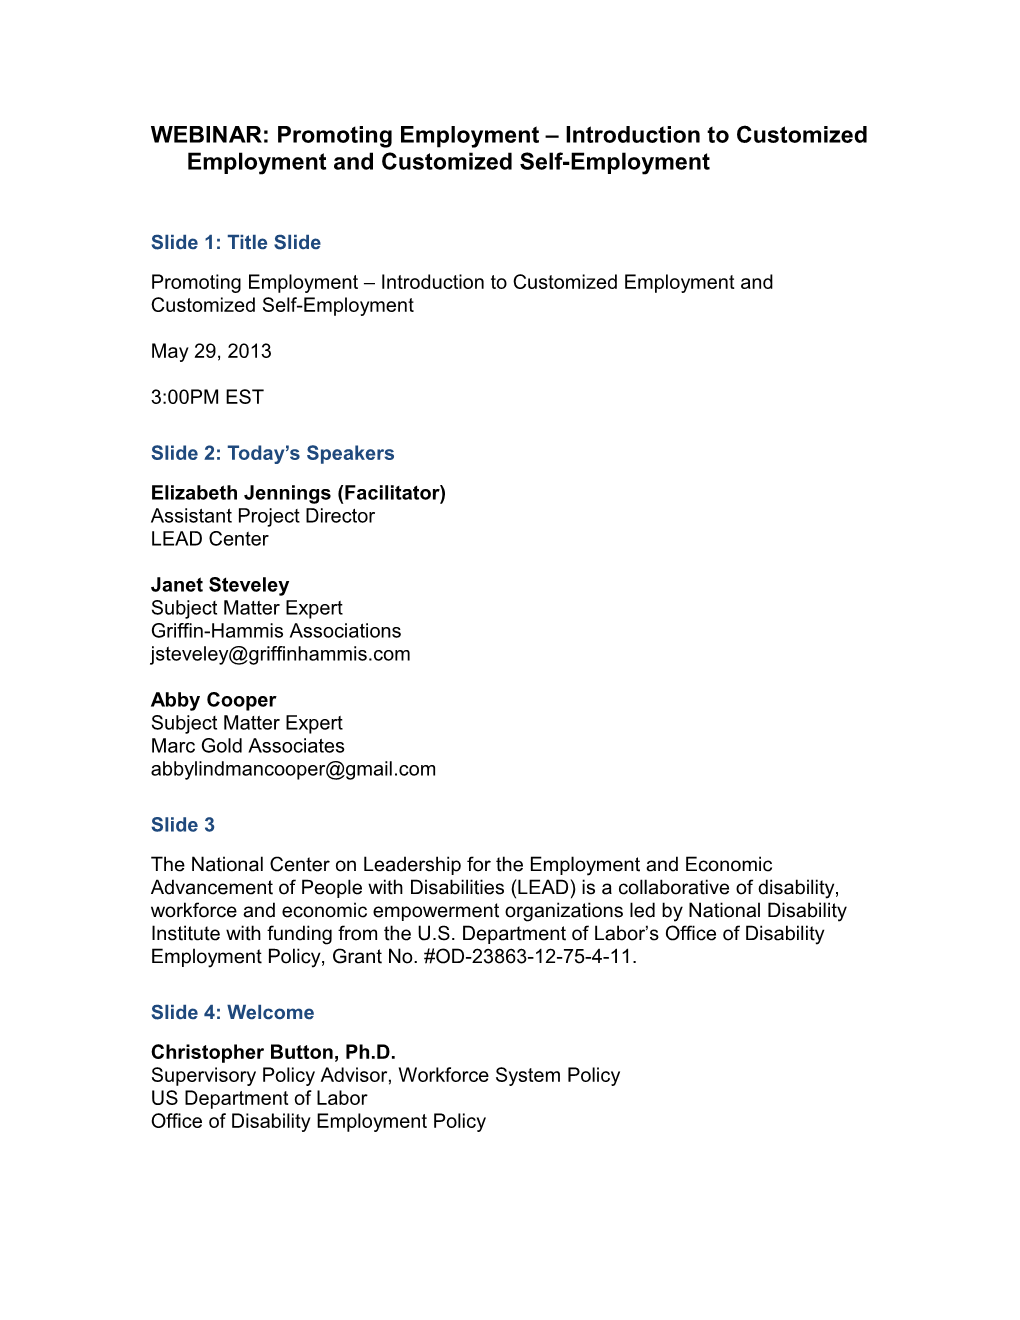 WEBINAR: Promoting Employment Introduction to Customized Employment and Customized